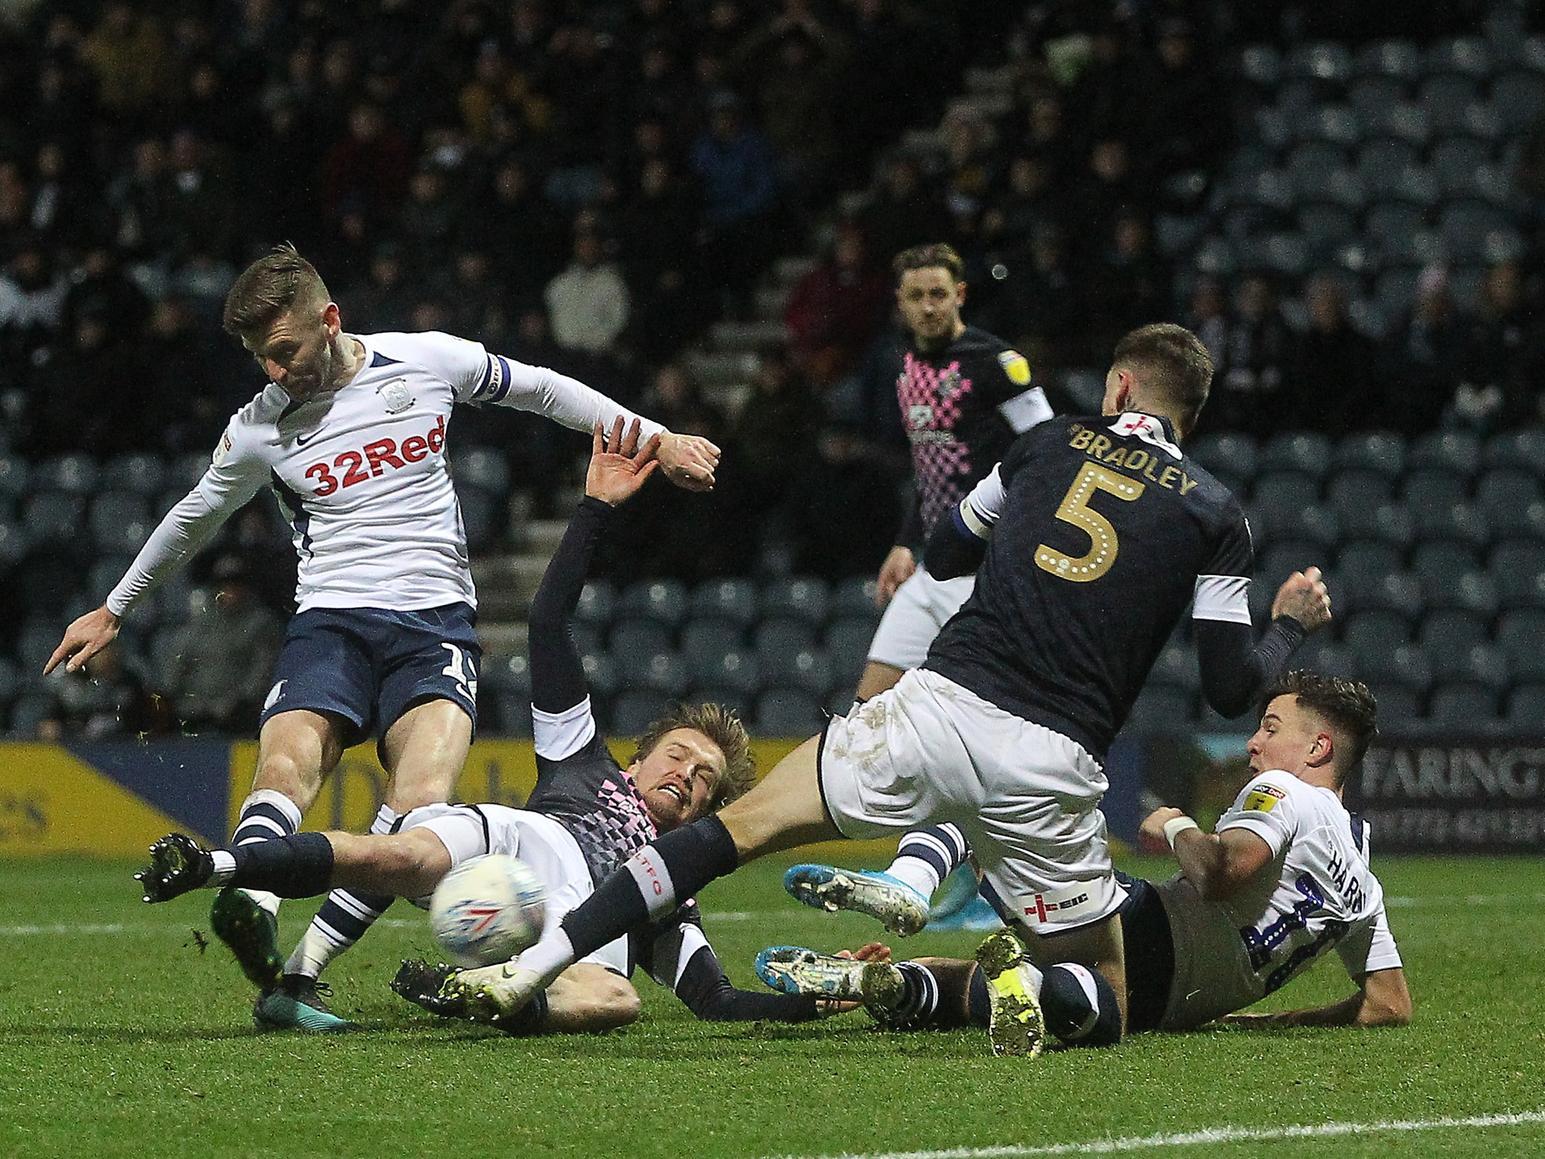 Paul Gallagher sees a shot blocked in an almighty scramble which leads to Preston's winner against Luton at Deepdale